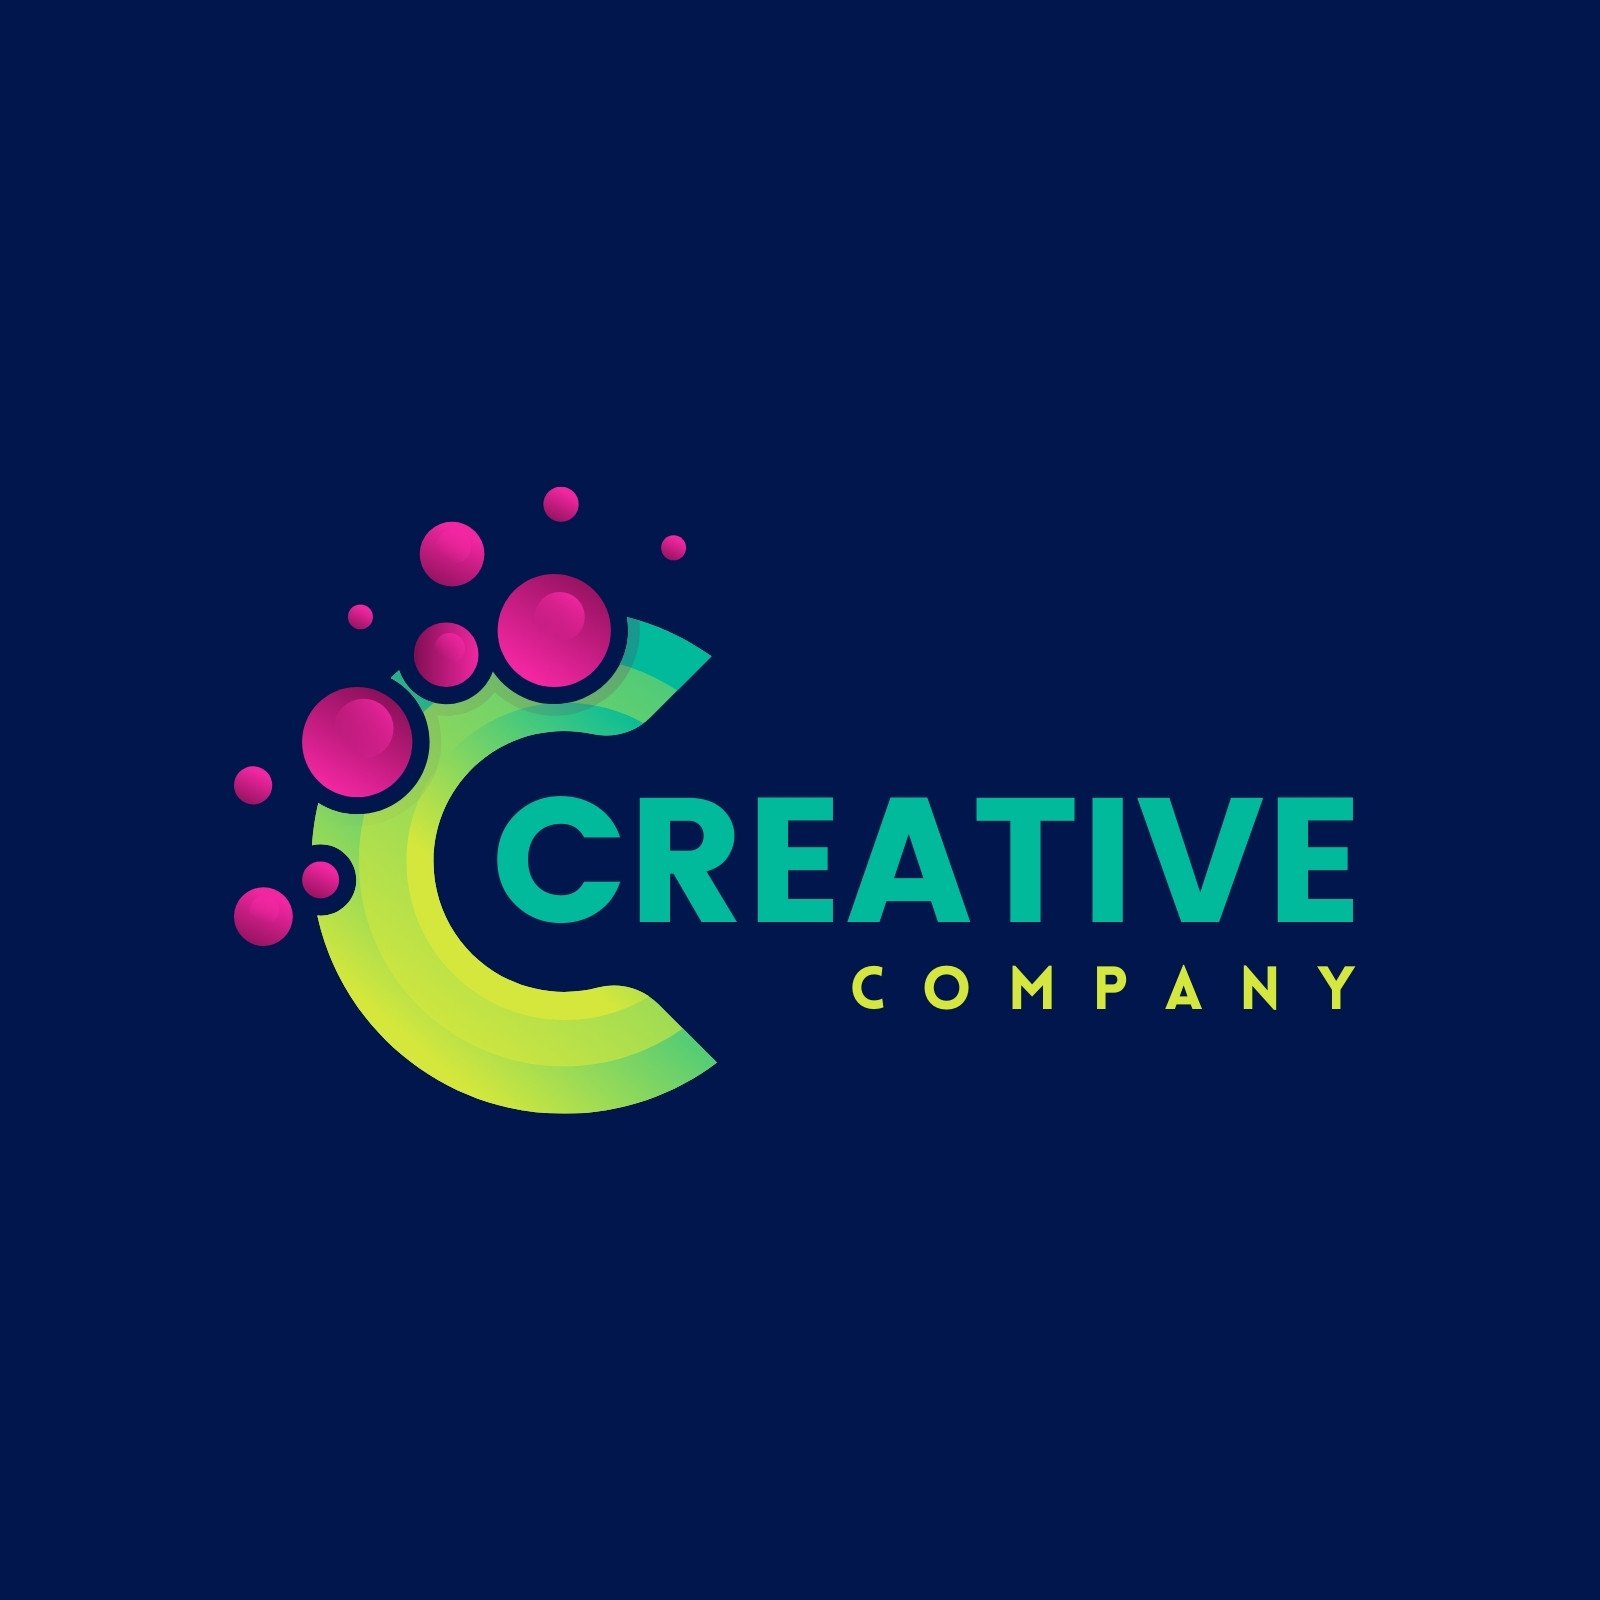 Creative logo or icon Template | PosterMyWall